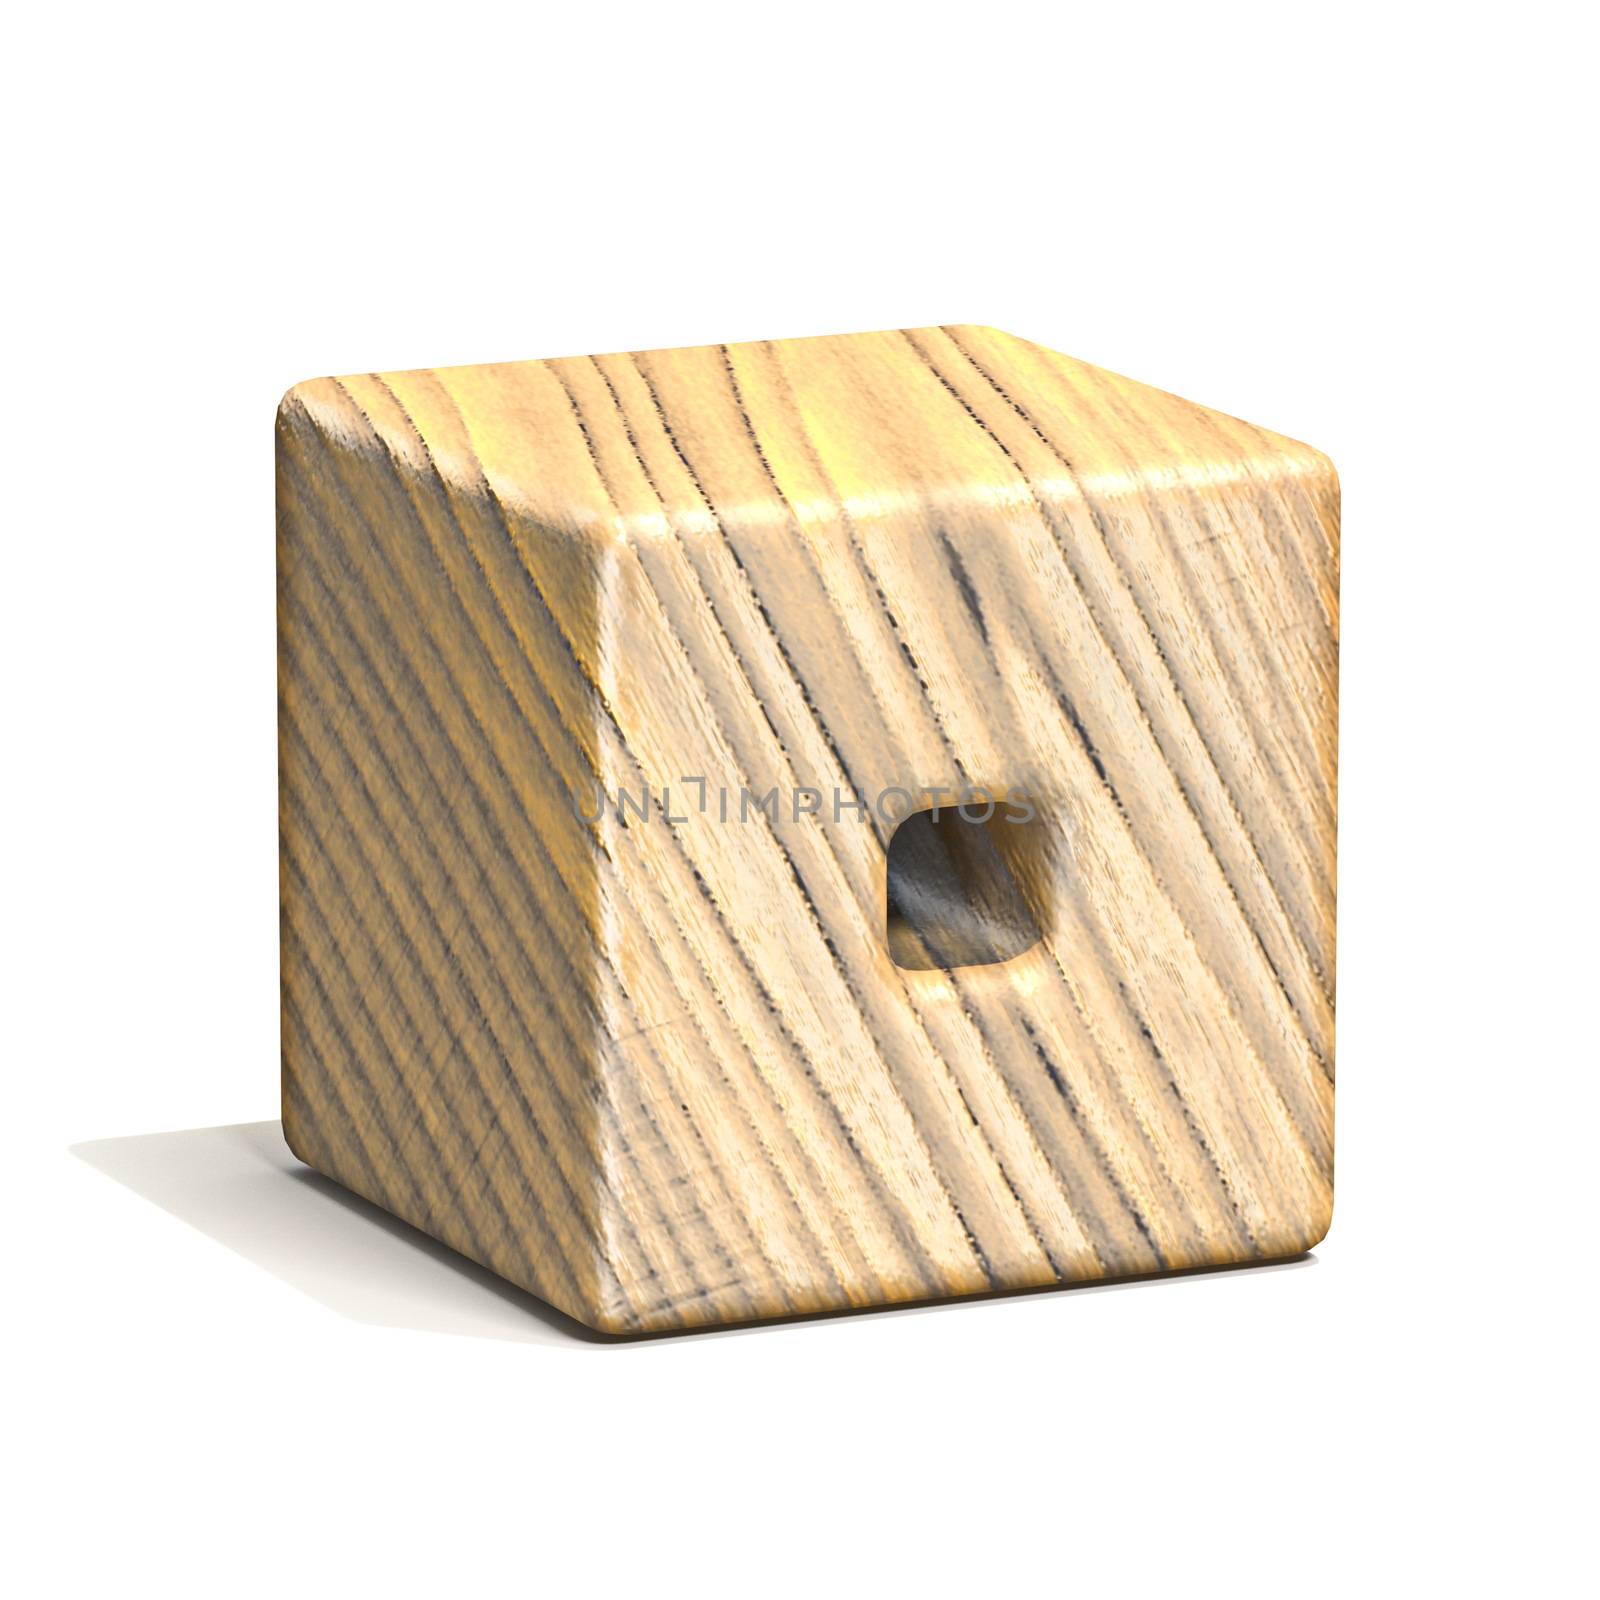 Solid wooden cube font Letter O 3D by djmilic